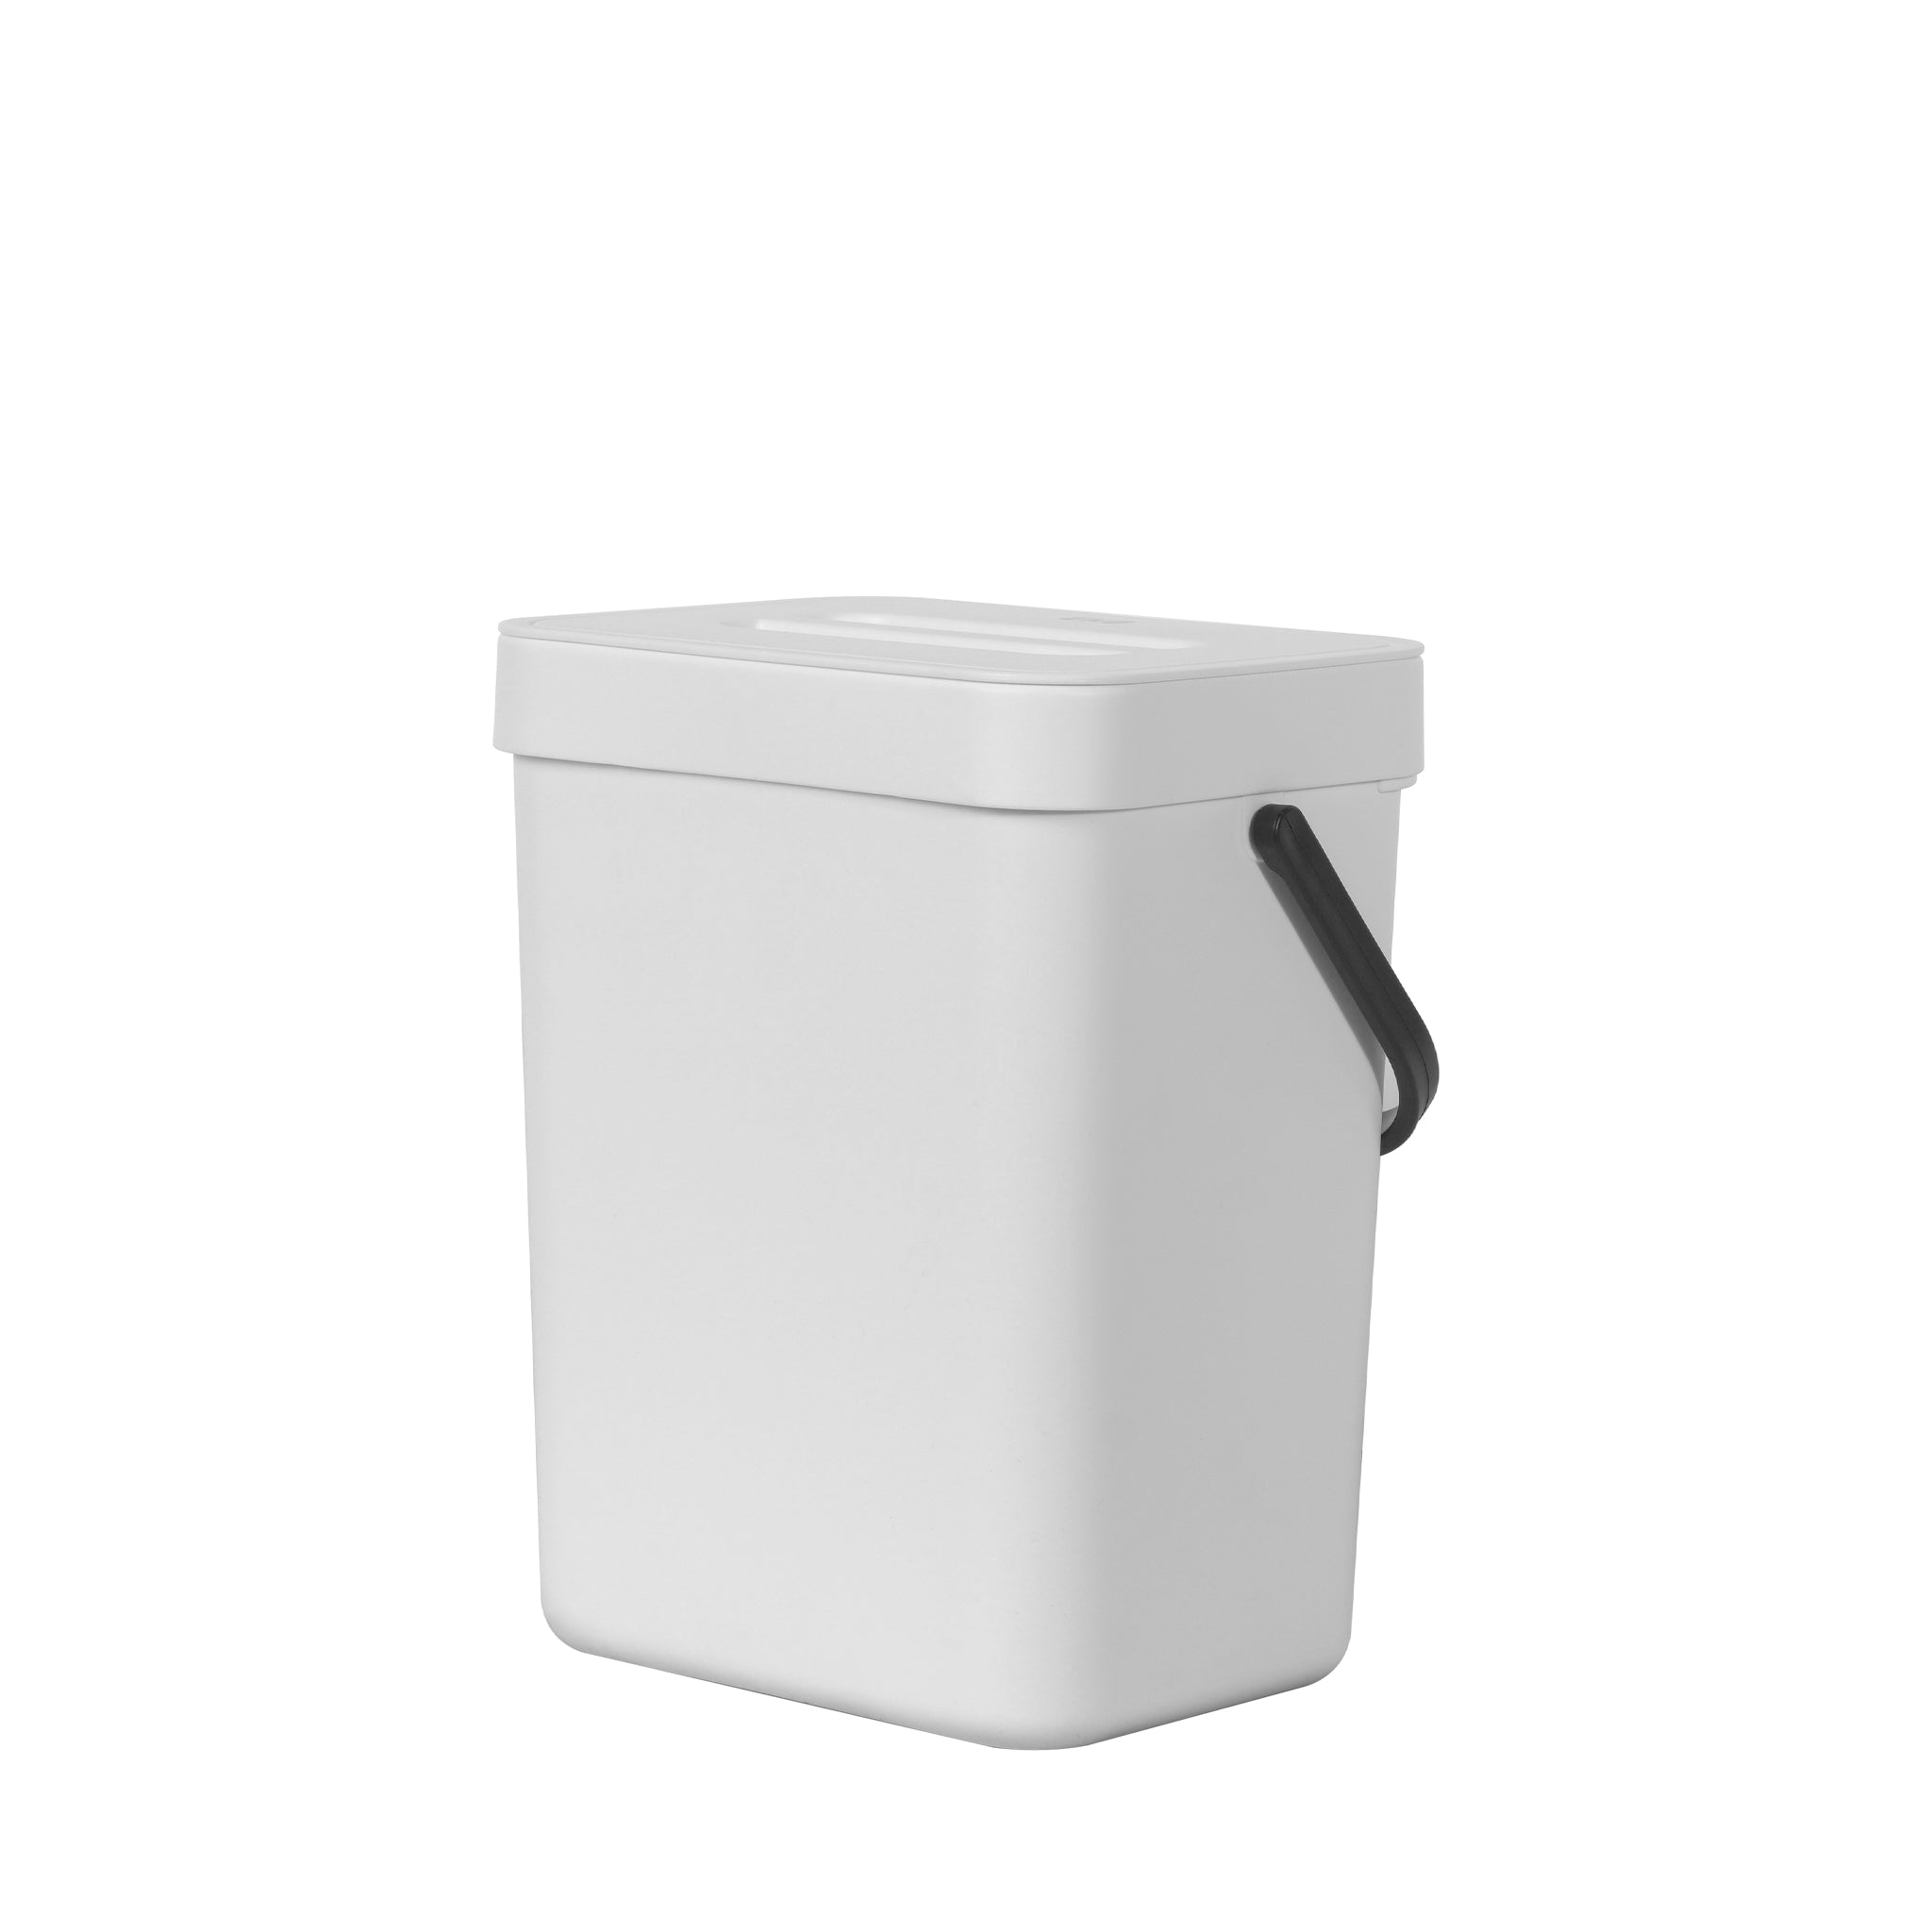 Puro Compost Bin with Lid - White 5L / 1.32 Gal